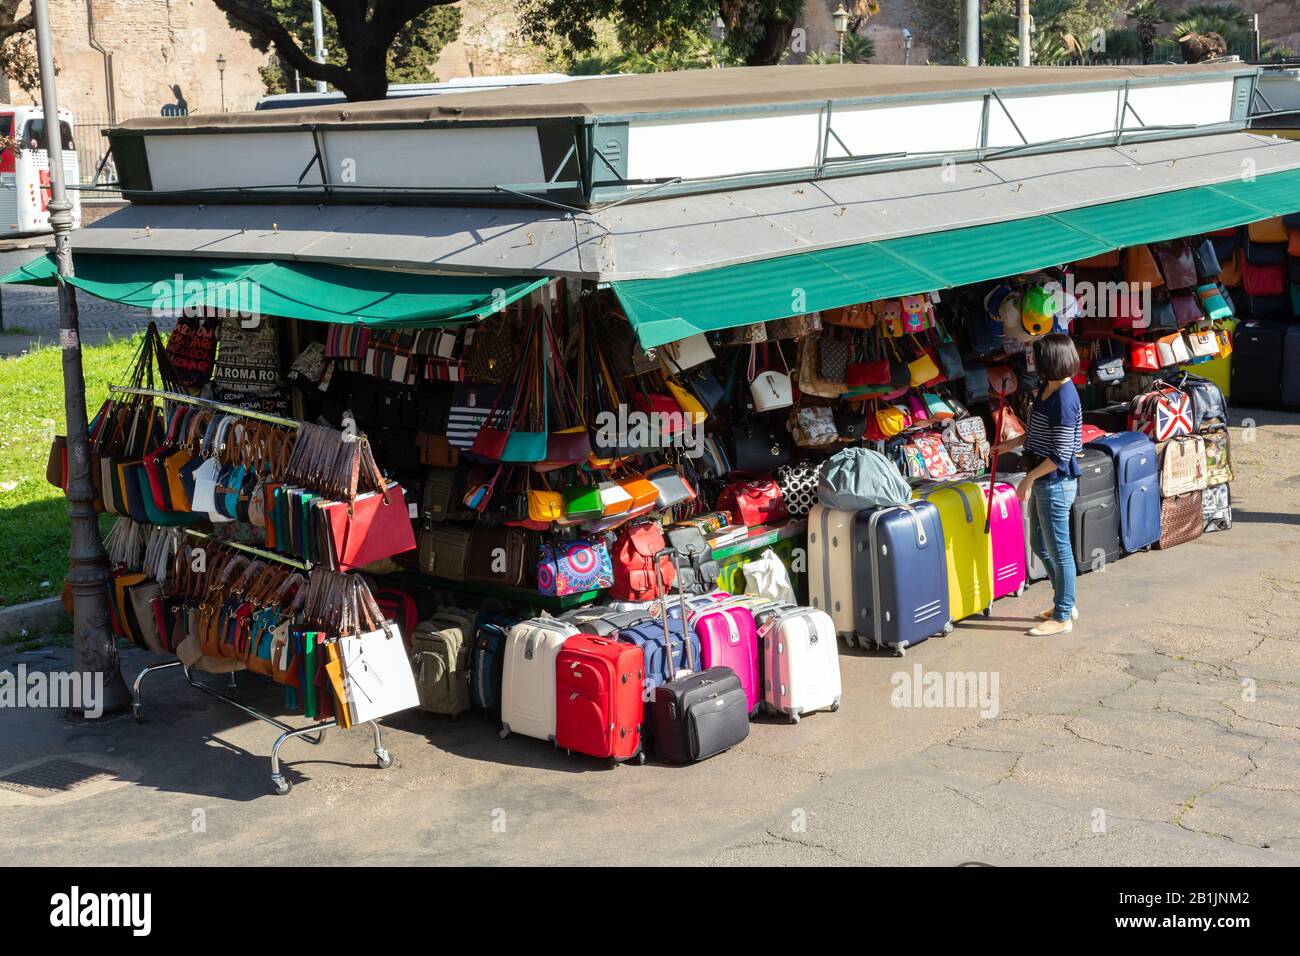 street market stall selling handbags and suitcases in Rome, Italy Stock Photo